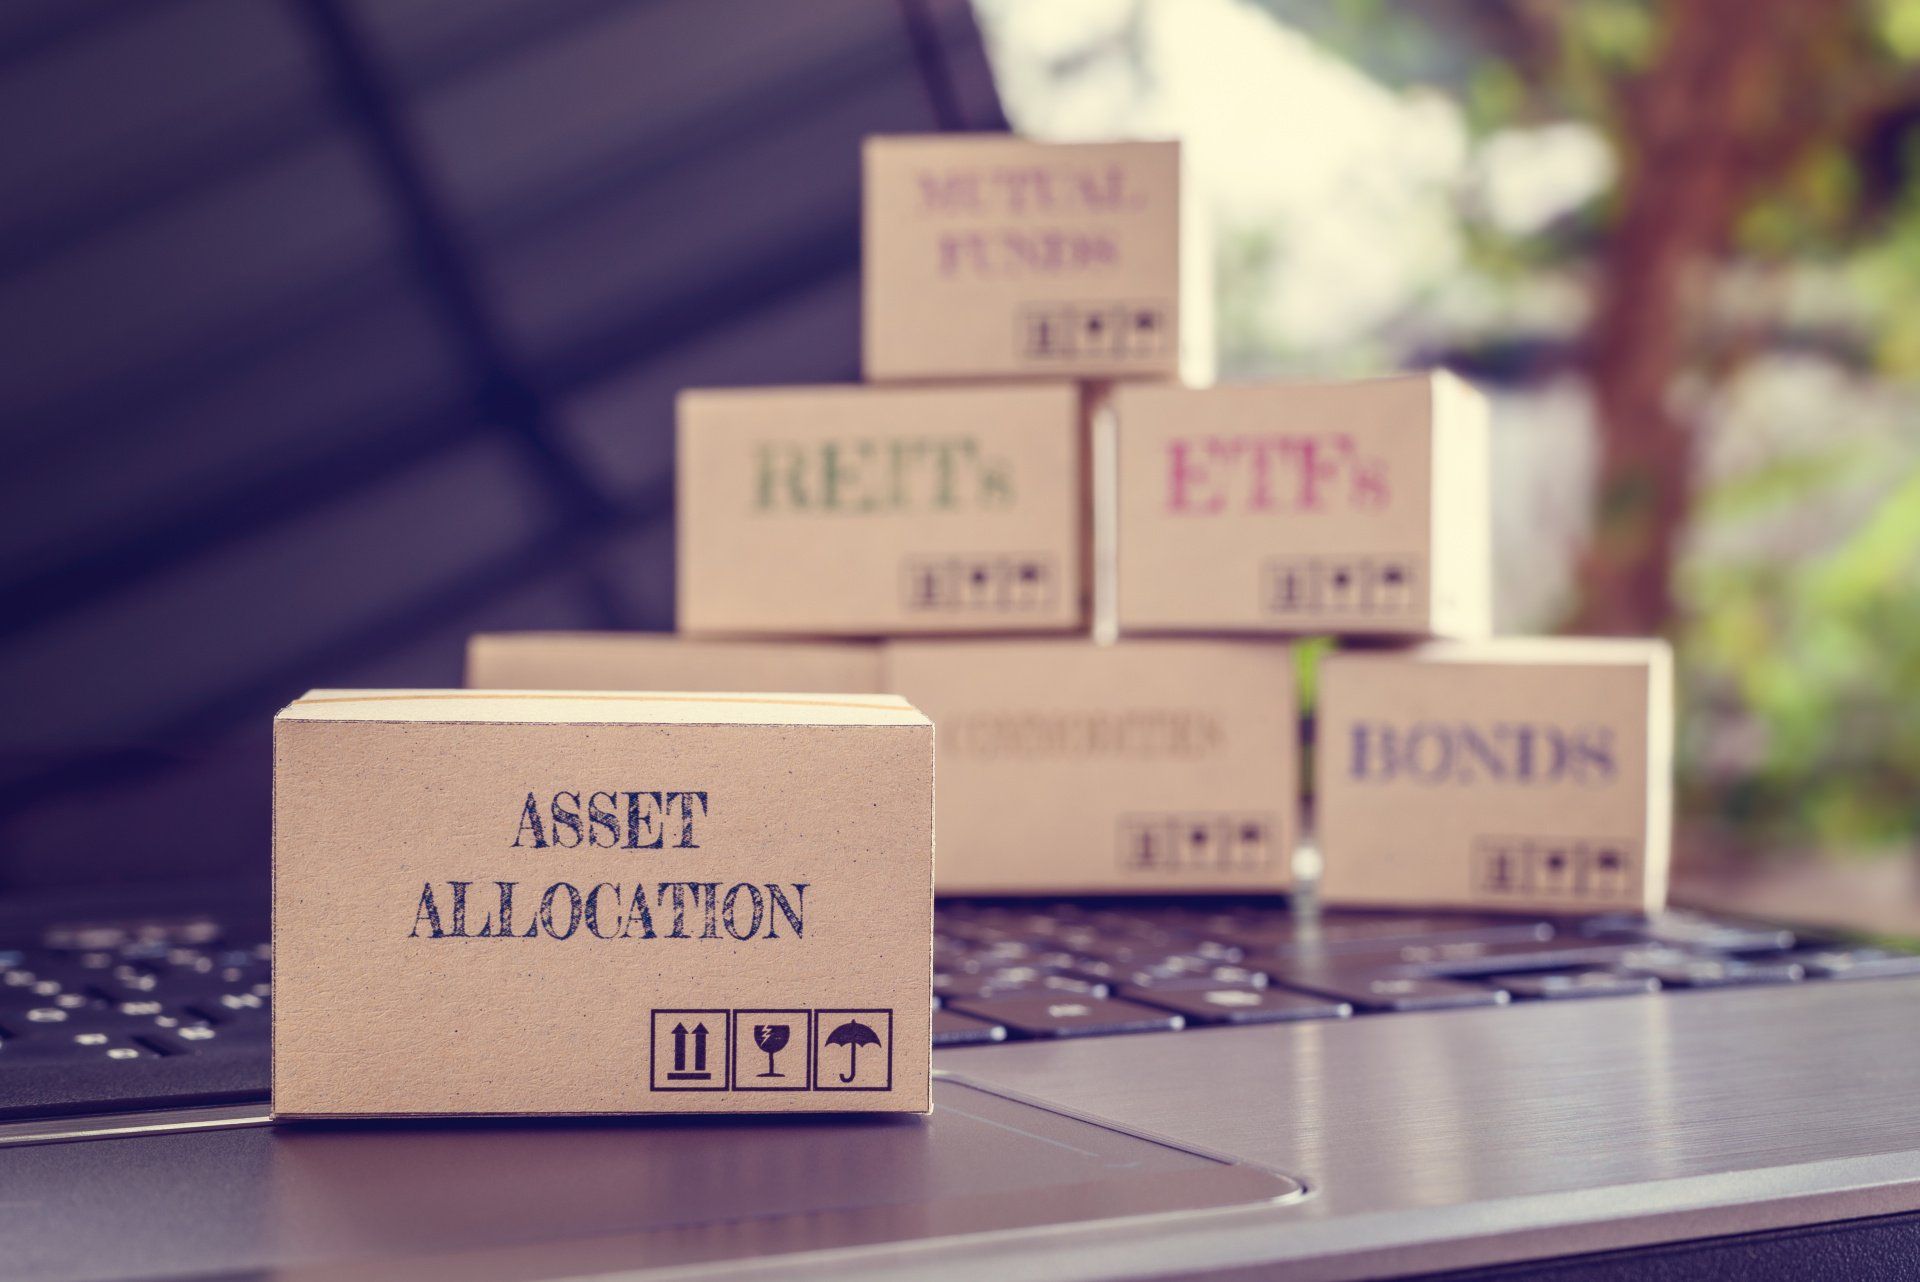 asset allocation box with others behind it on computer